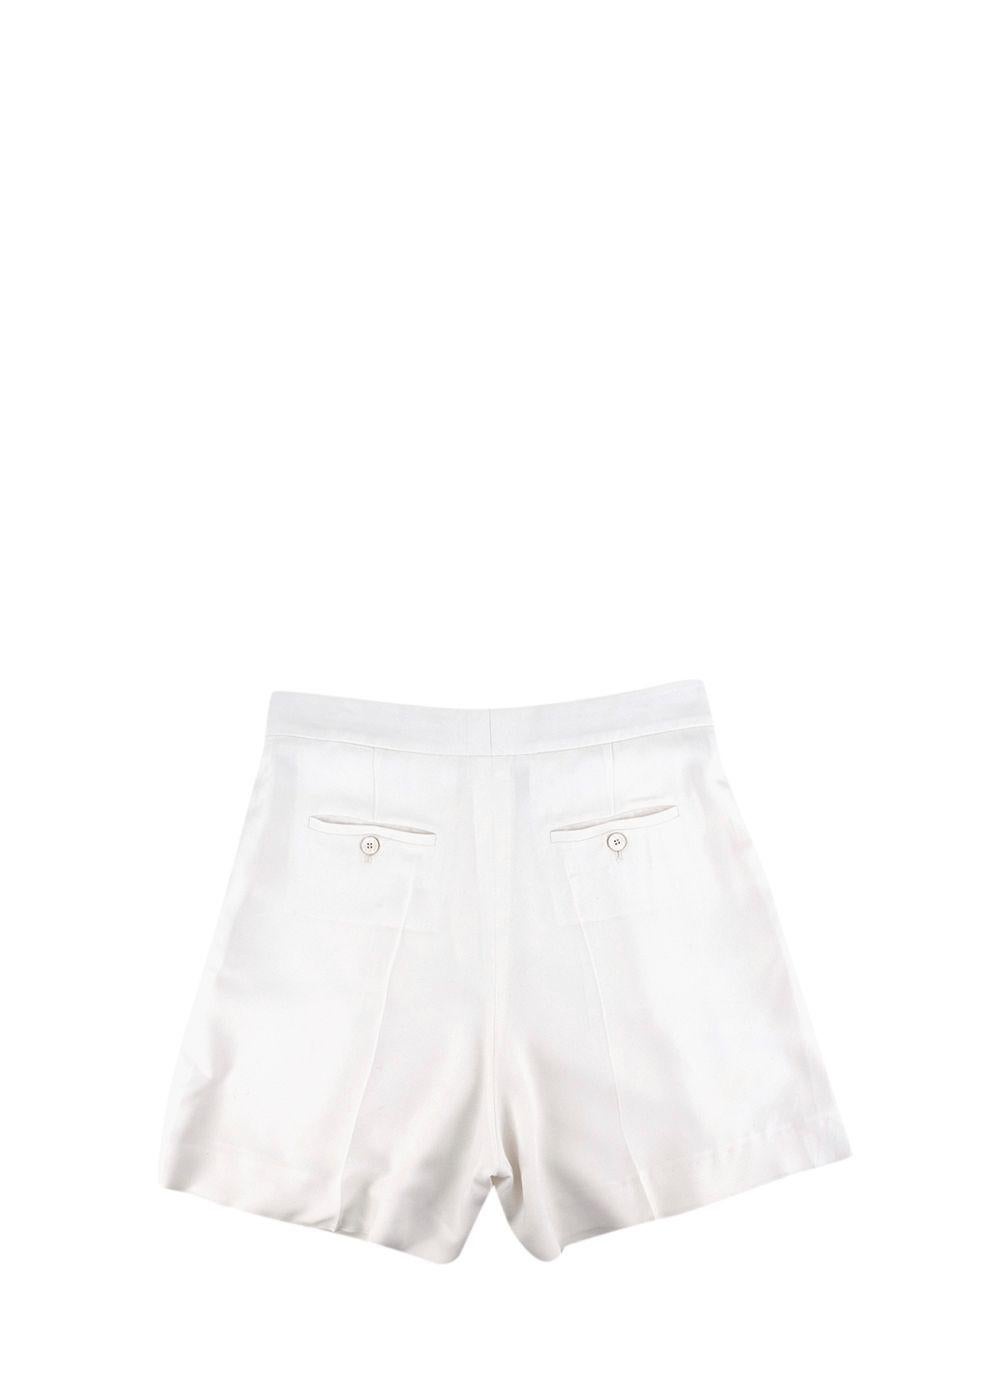 Chloe Ivory Silk Twill Tailored Shorts

- High waisted
- Lightweight silk twill 
- Slip side pockets 
- Two back pockets with button fastening 
- Zip fly with hook and bar fastenings 
- Silk lined

Material: 
Shell:
53% Acetate
47% Viscose
Lining: